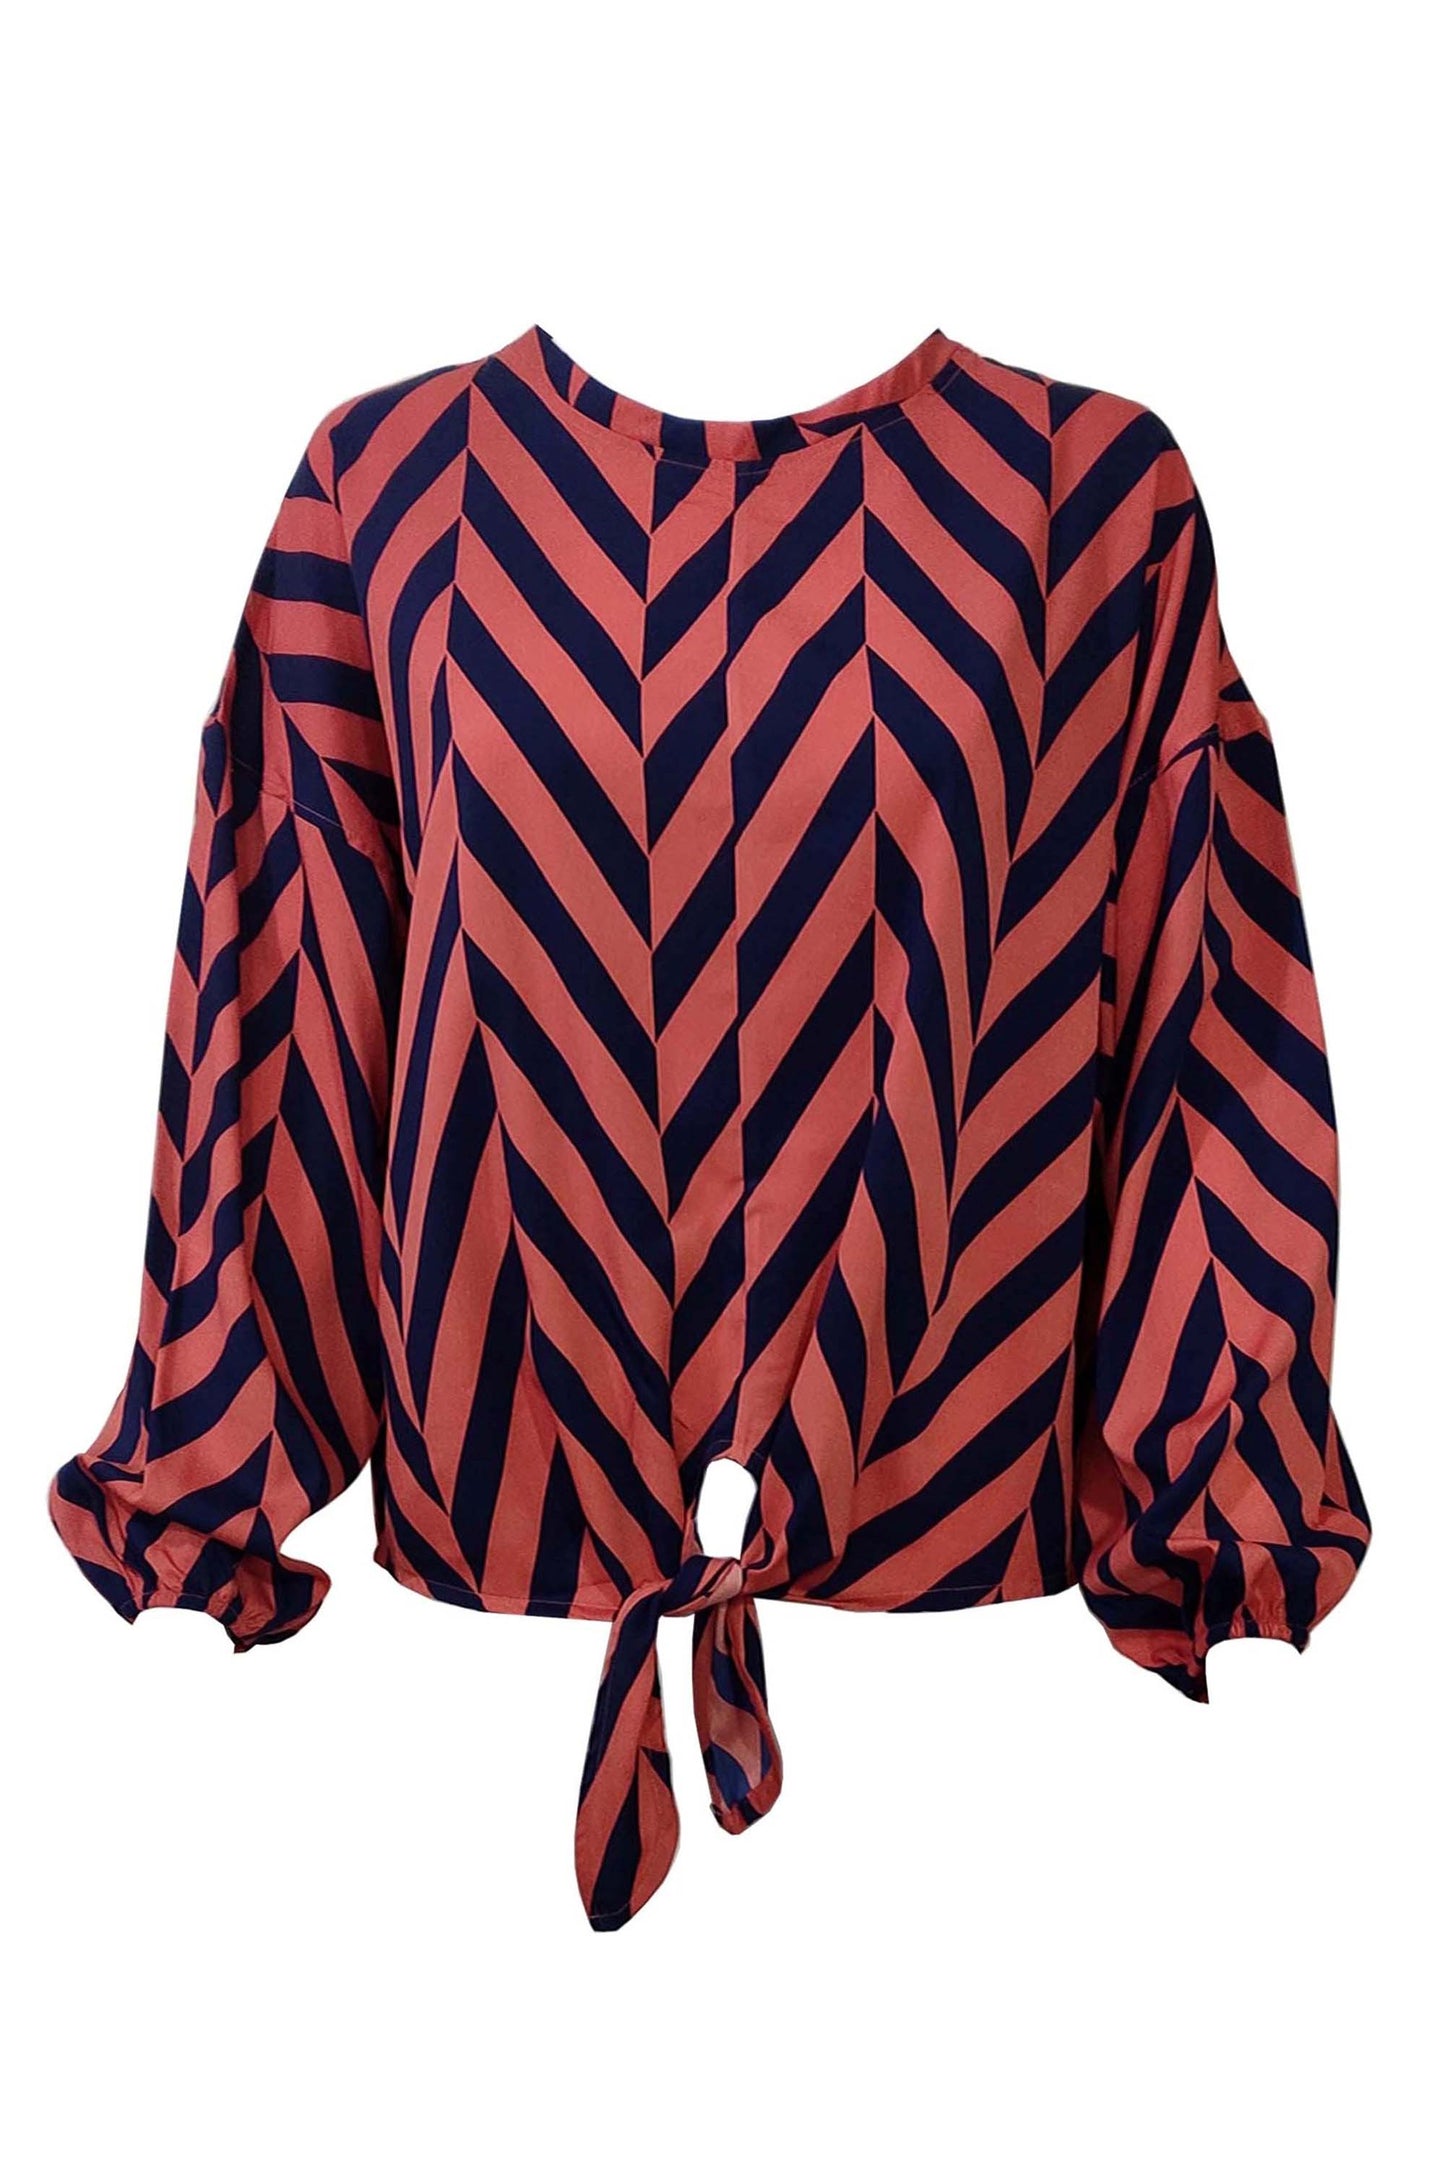 Women's Orange Printed Top With Front Knot